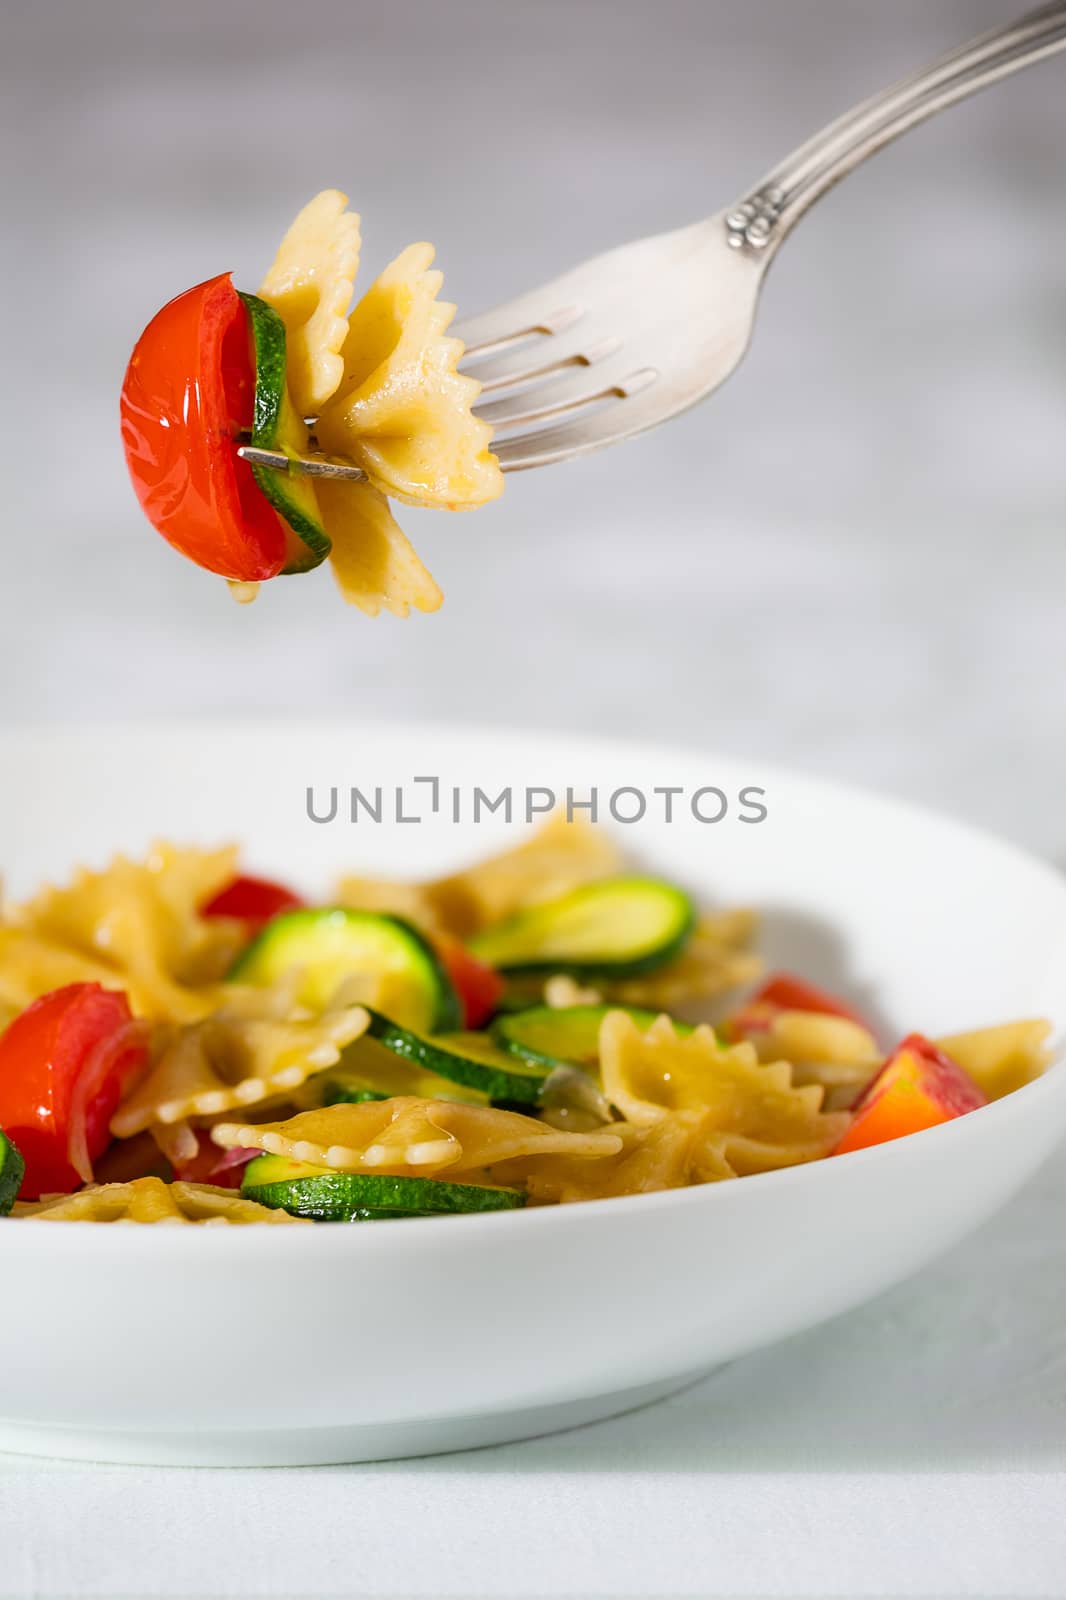 Whole farfalle pasta with zucchini, cherry tomatoes and red onion suspended on the fork